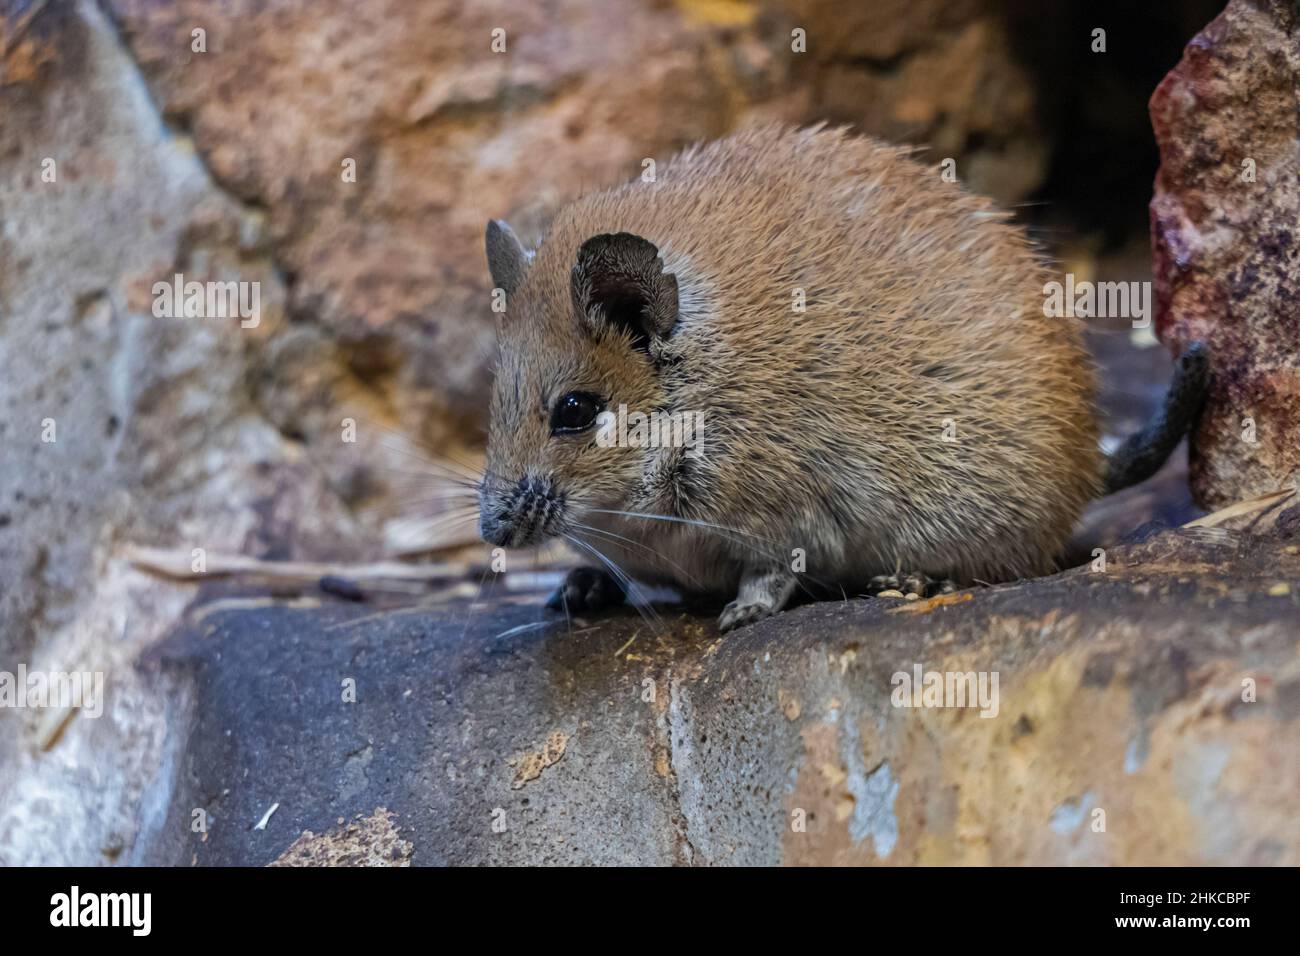 A golden spiny mouse (Acomys russatus) common in Egypt and much of the Middle East, including Jordan, Israel, Oman, Saudi Arabia, and Yemen. Stock Photo